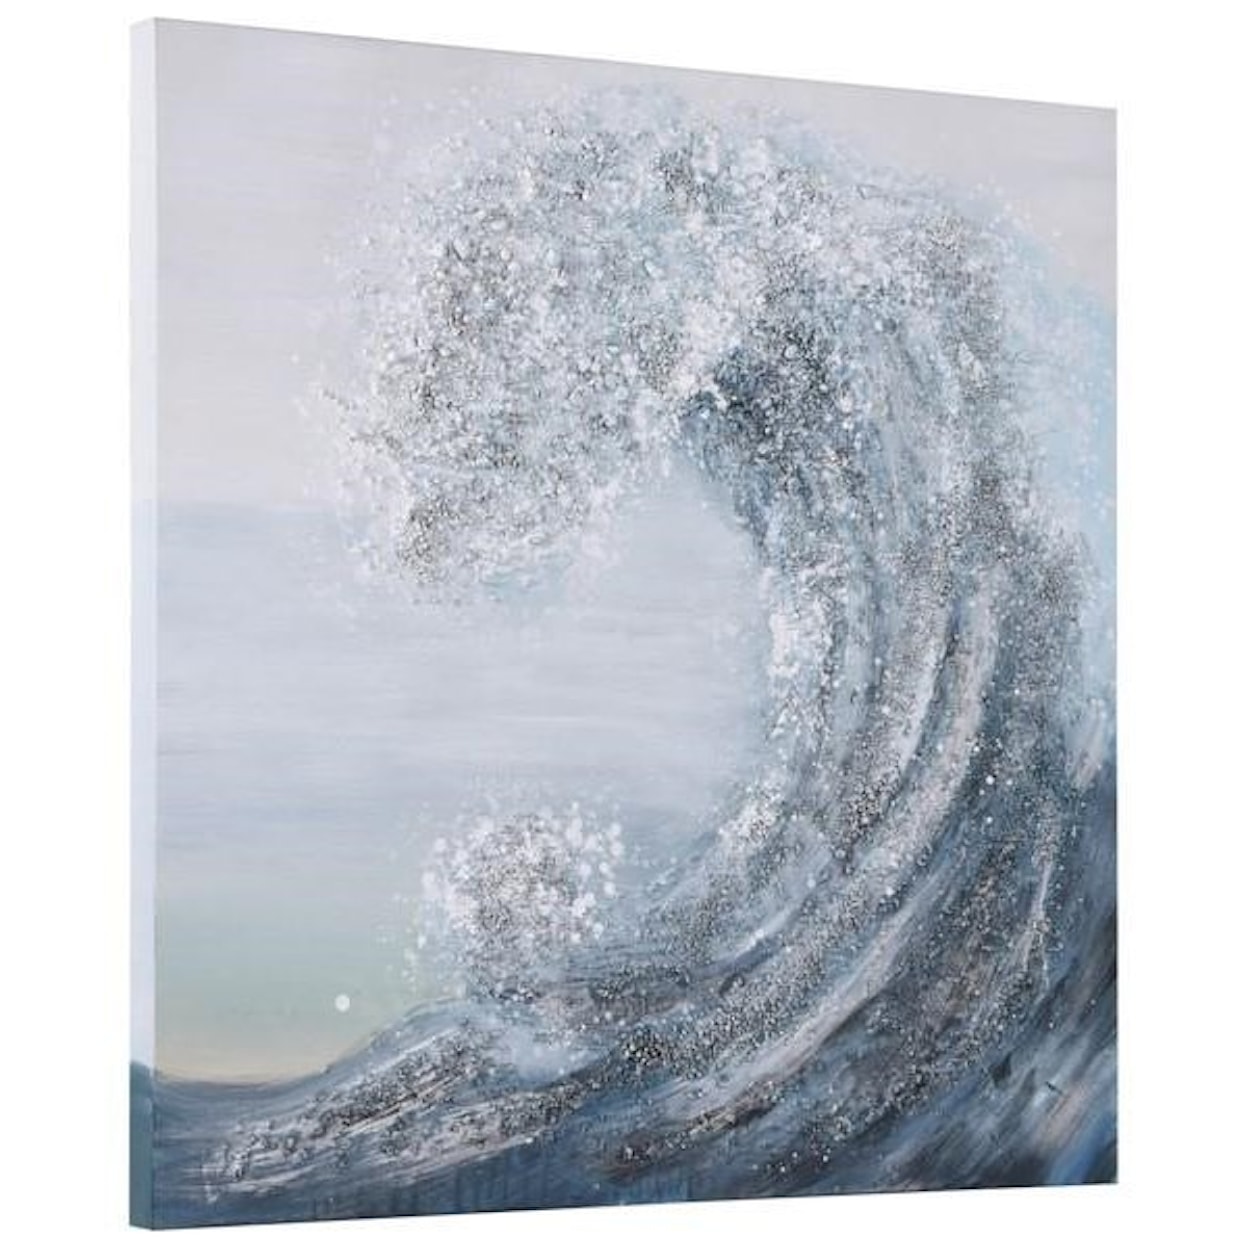 Empire Art Direct Accessories Crystal Wave